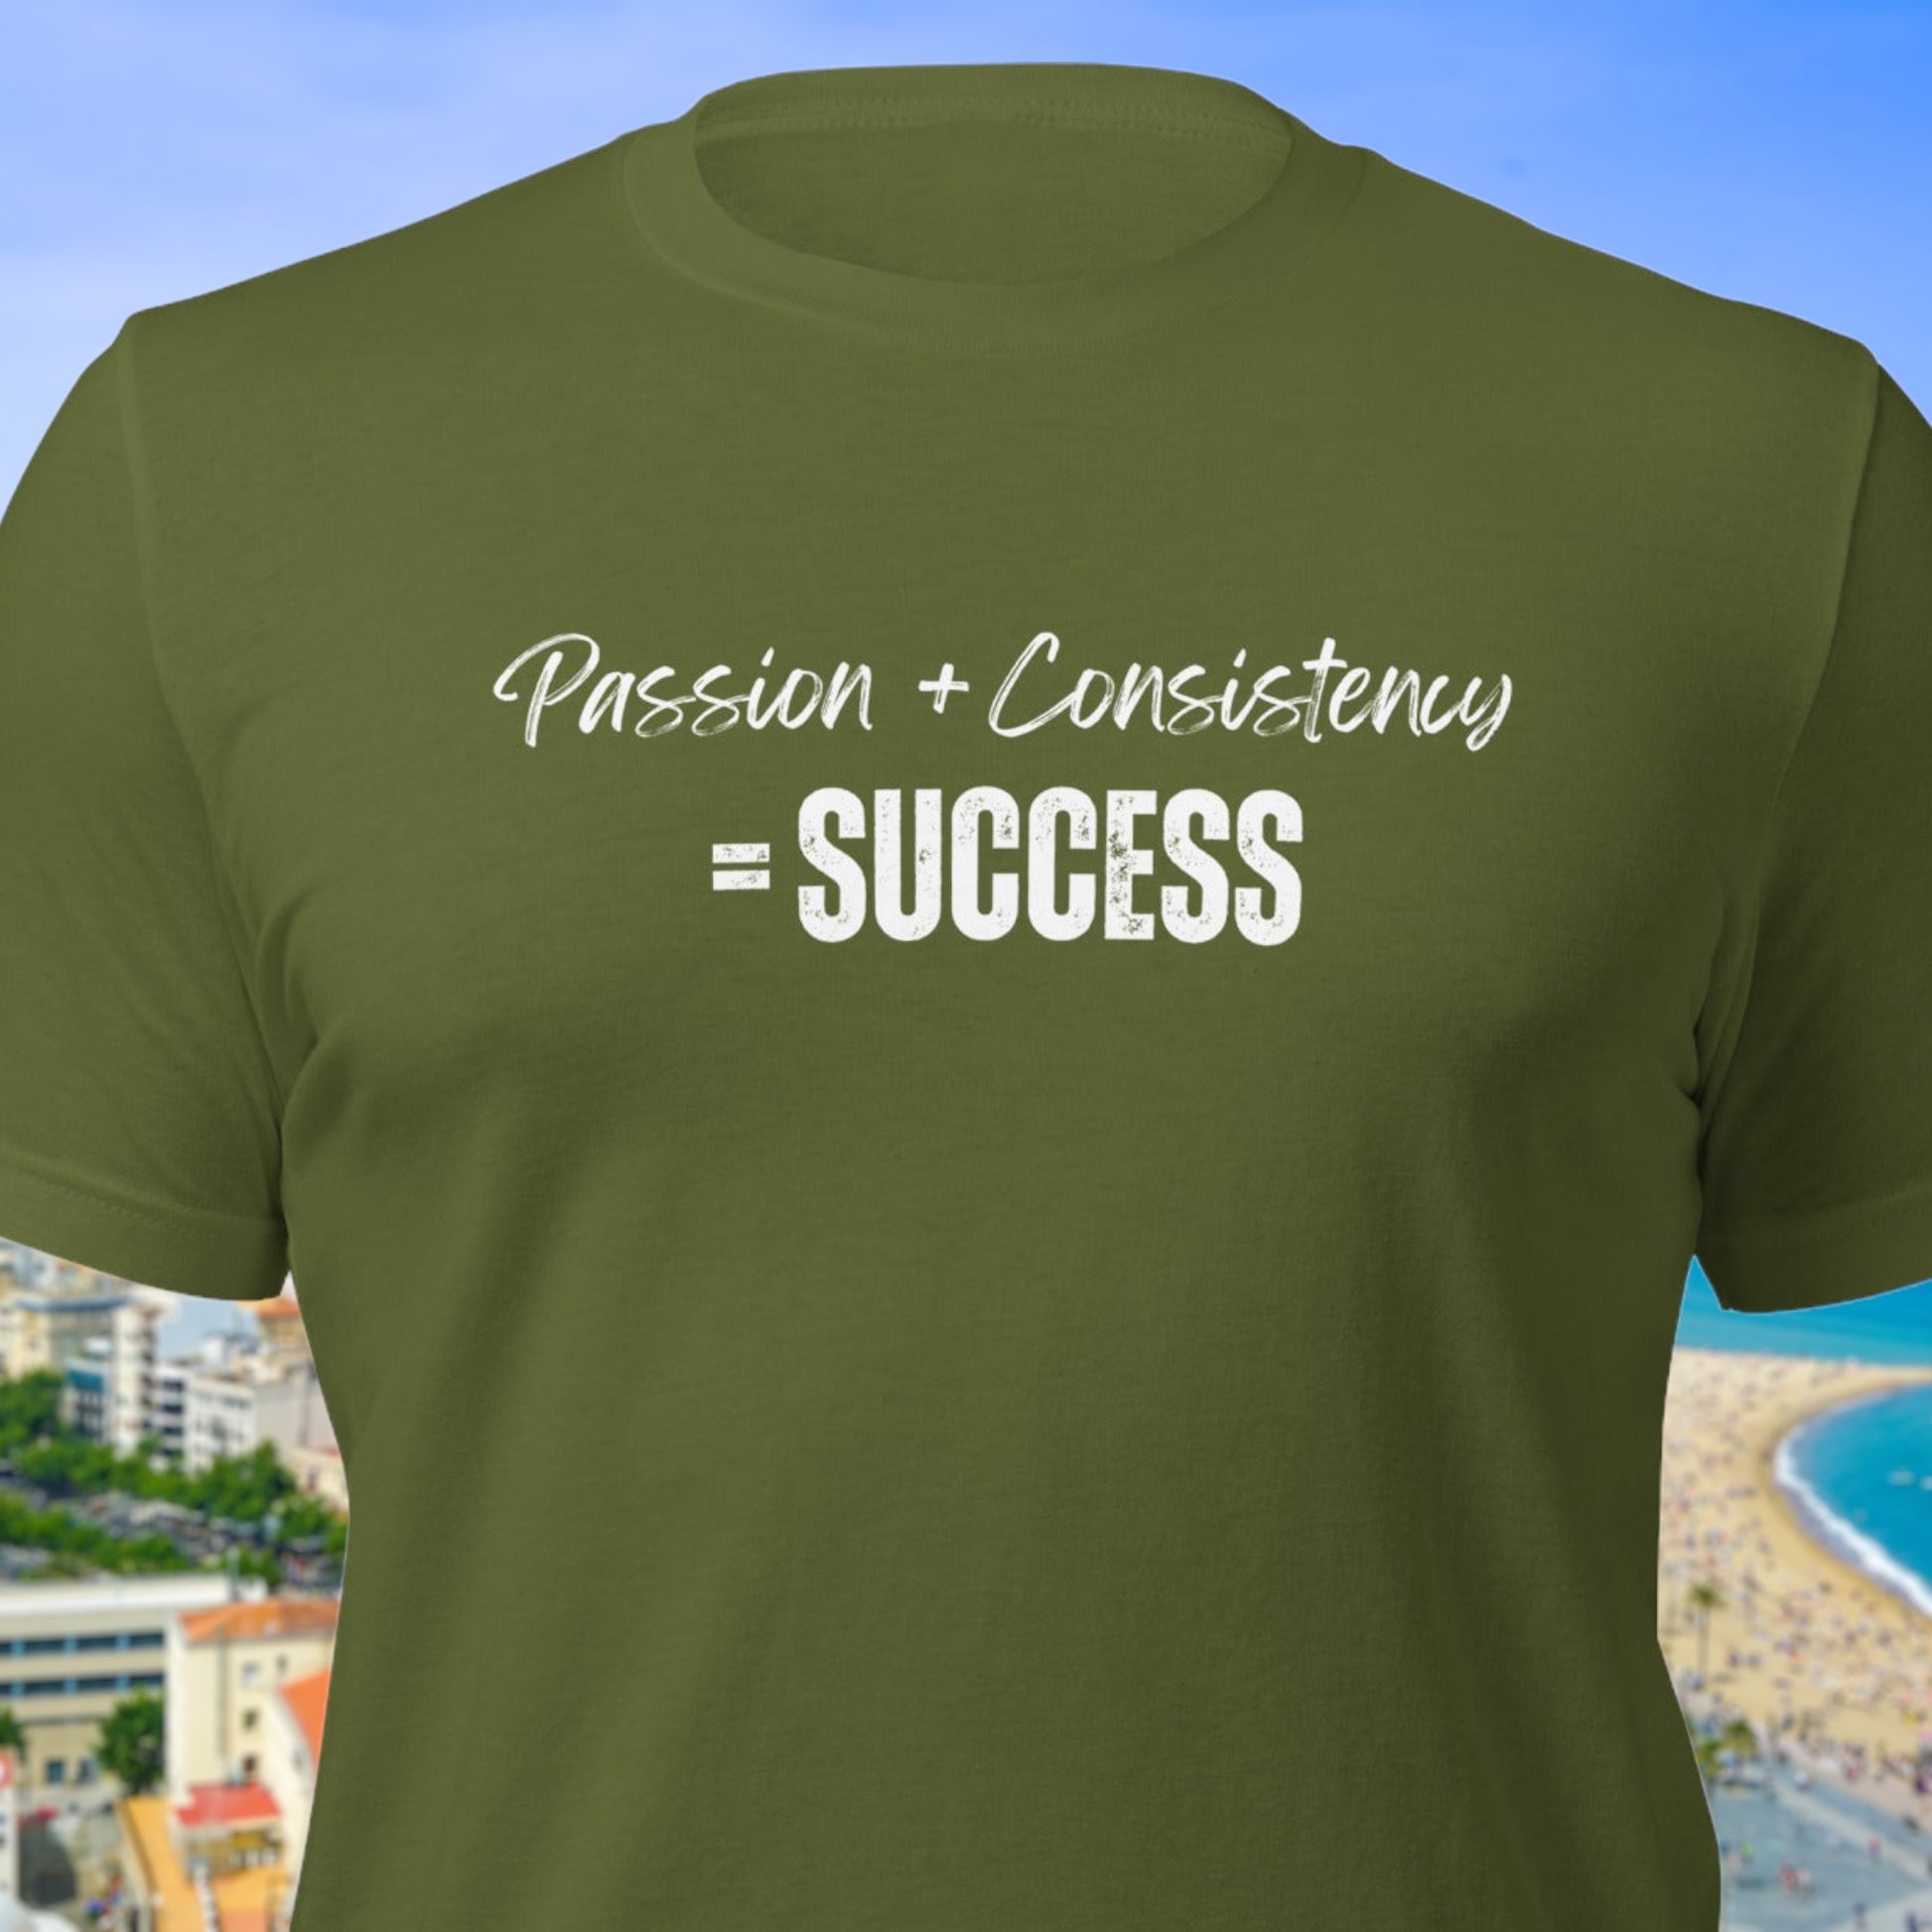 "Passion + Consistency + Success" T-Shirt - Weave Got Gifts - Unique Gifts You Won’t Find Anywhere Else!